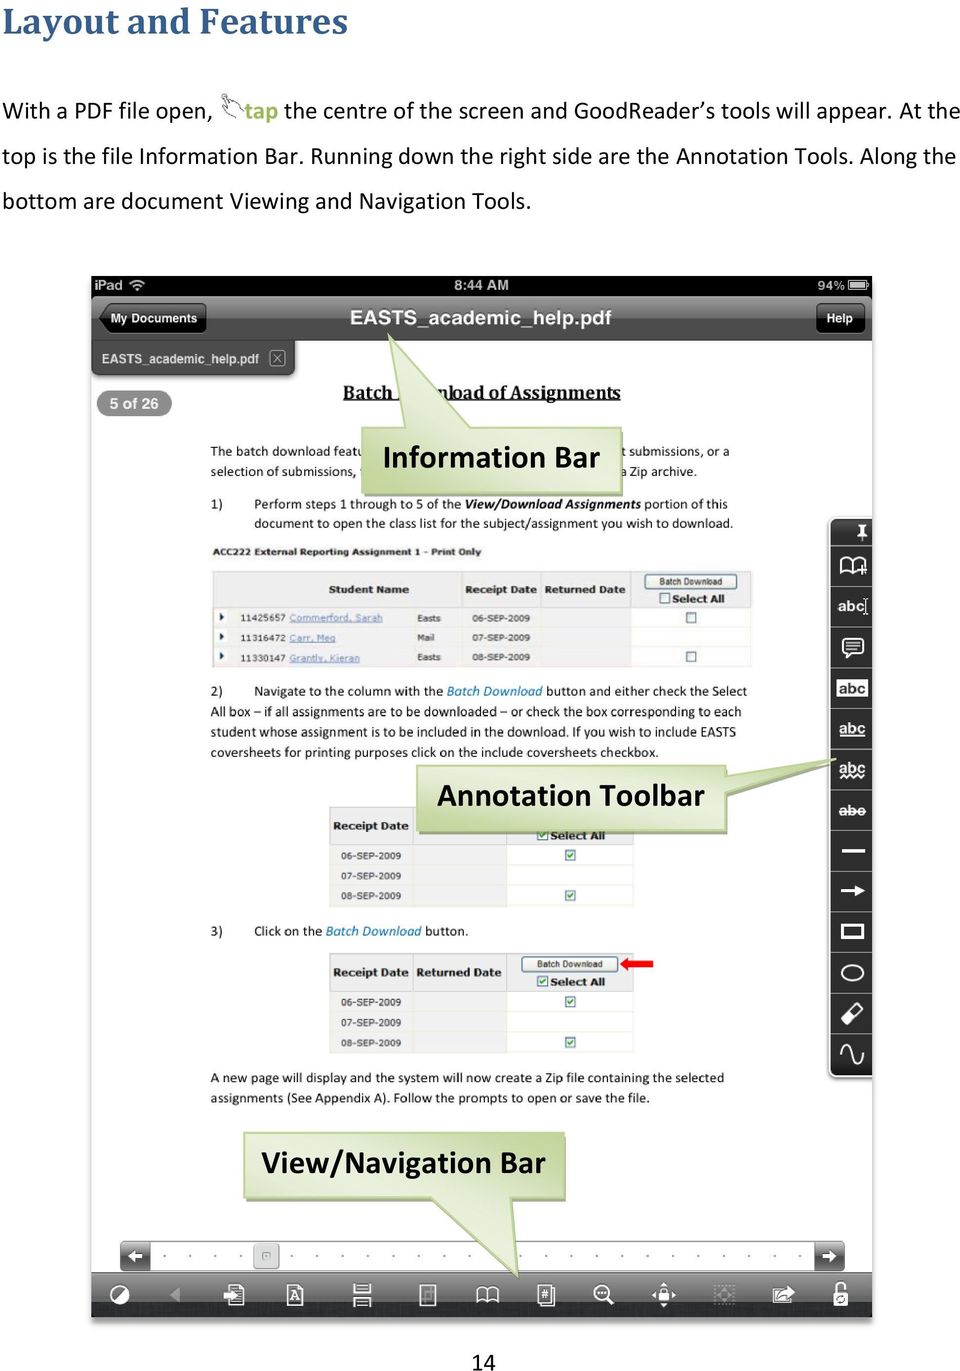 Running down the right side are the Annotation Tools.